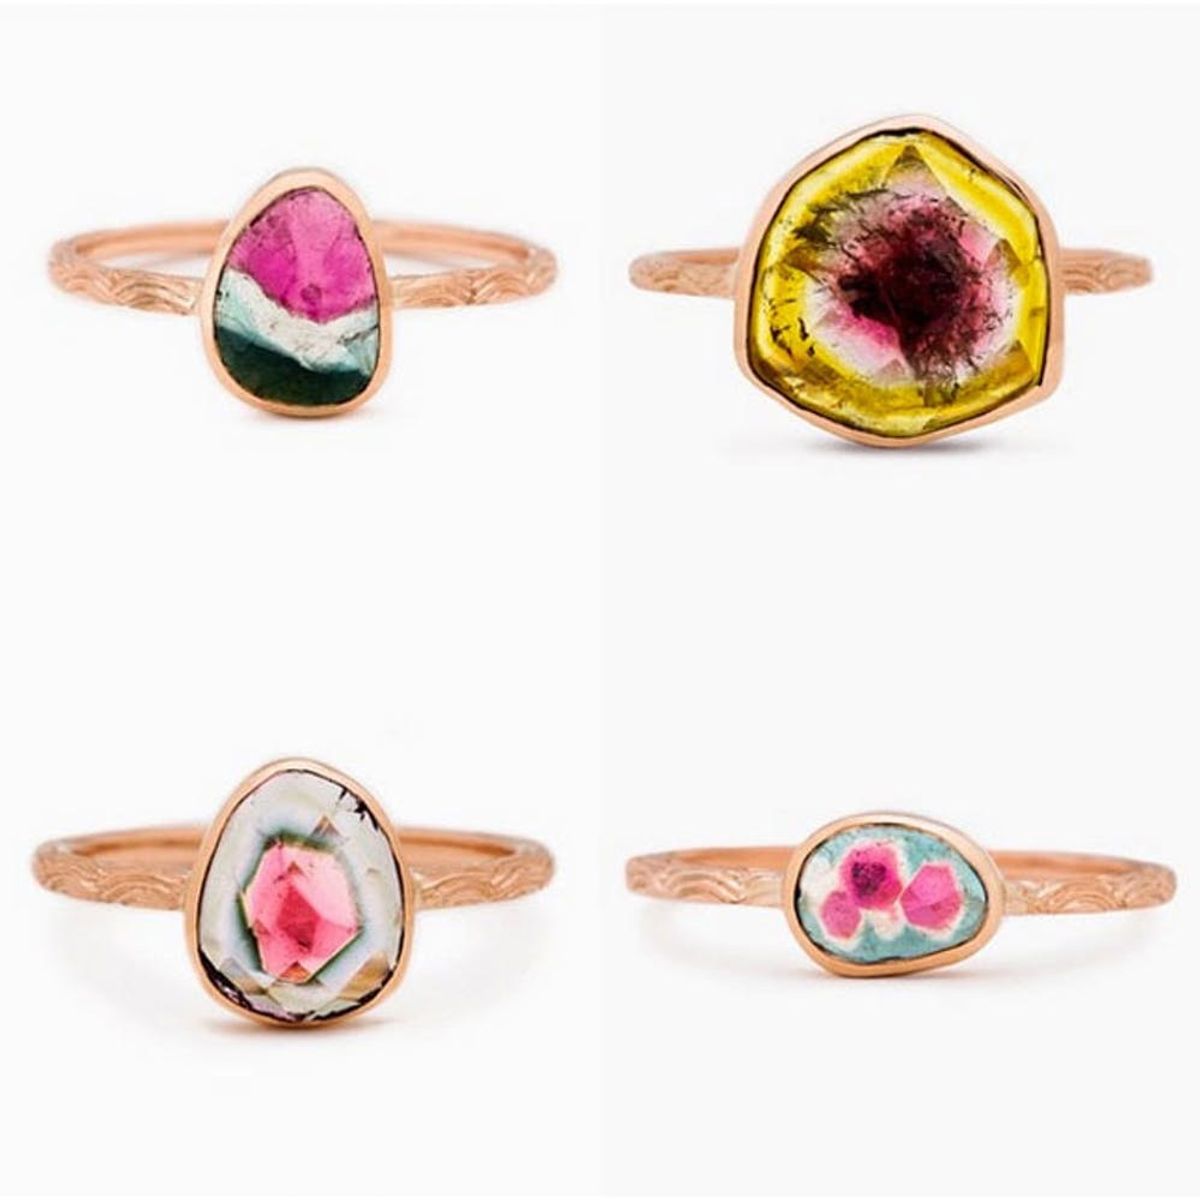 13 Amazing Jewelers + Bling to Follow On Instagram